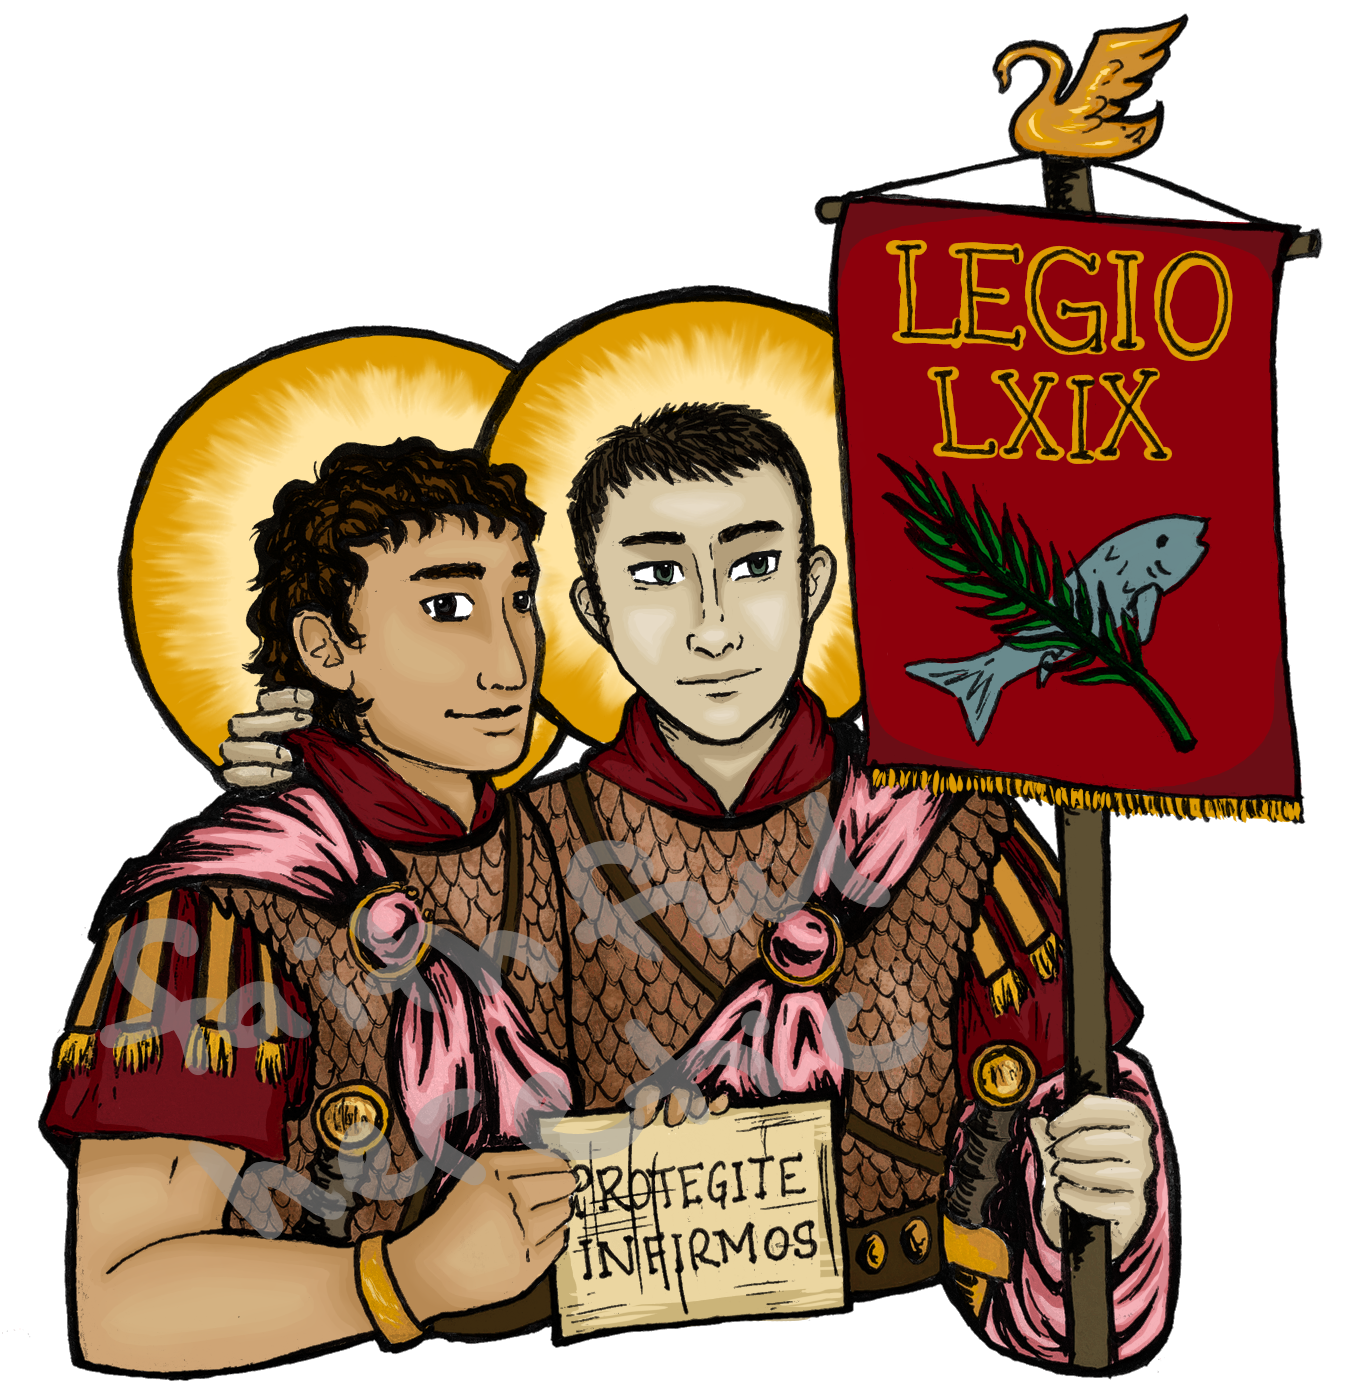 two Roman soldiers in scale armor holding a banner and touching each other affectionately